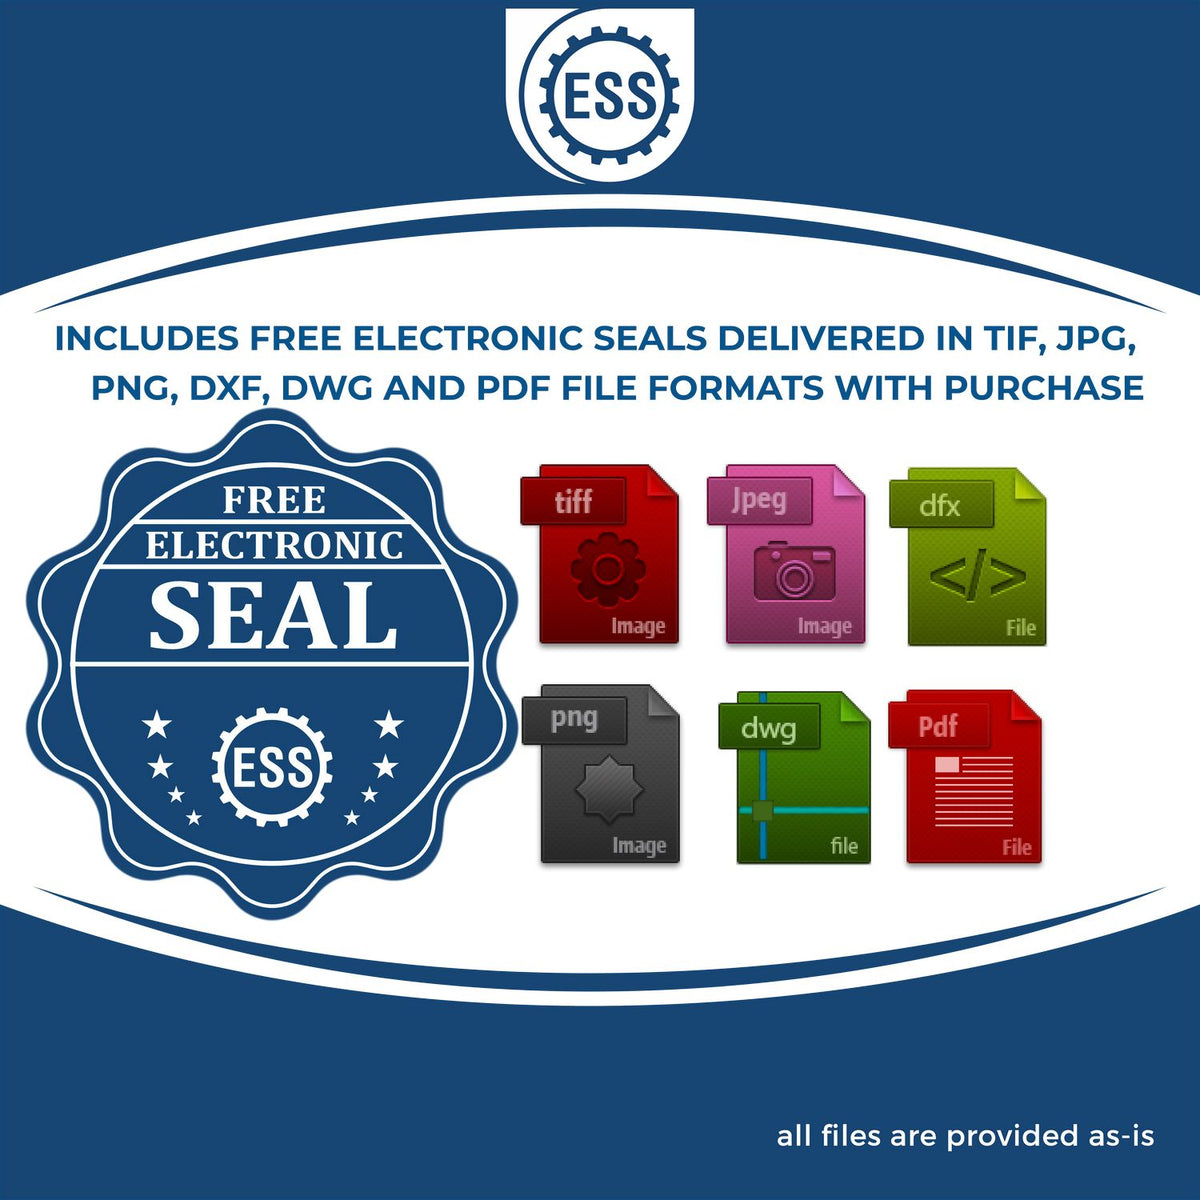 An infographic for the free electronic seal for the Soft Oregon Professional Geologist Seal illustrating the different file type icons such as DXF, DWG, TIF, JPG and PNG.